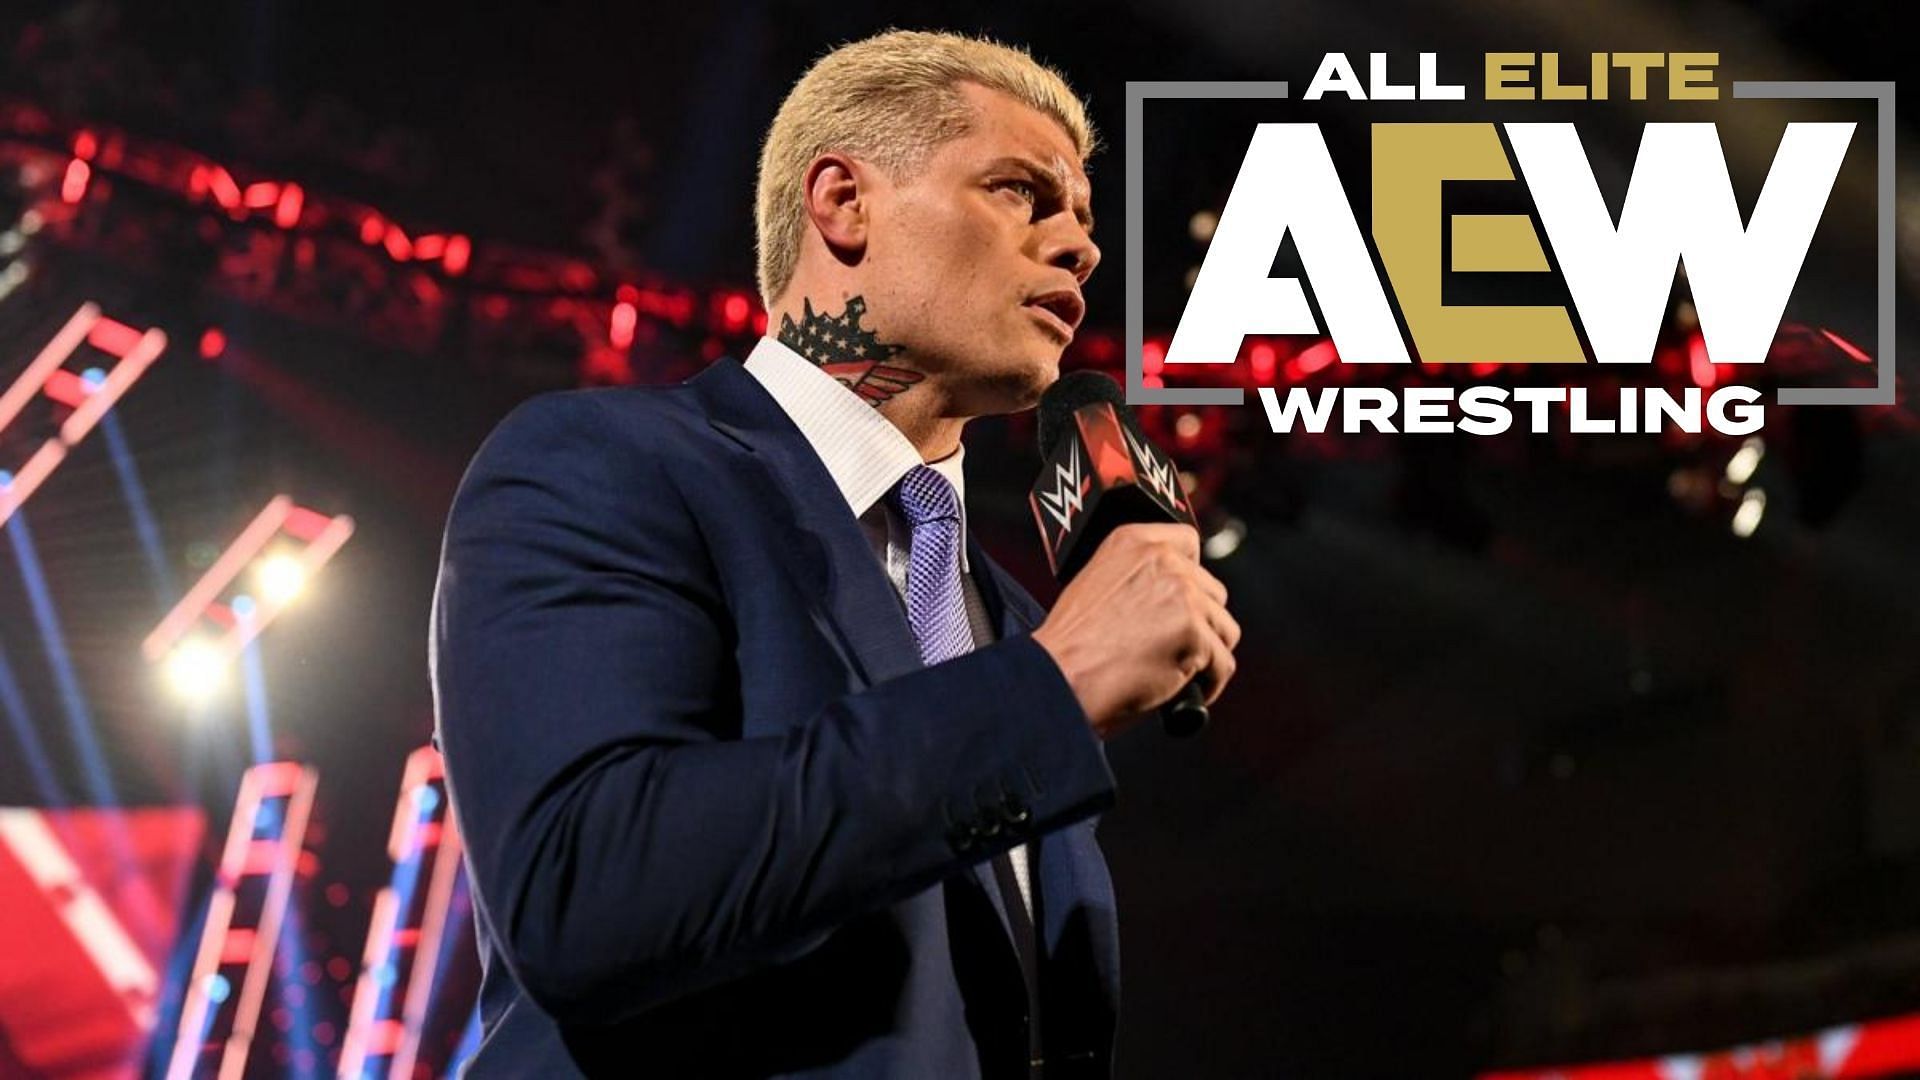 Cody Rhodes worked with Arn Anderson in AEW.